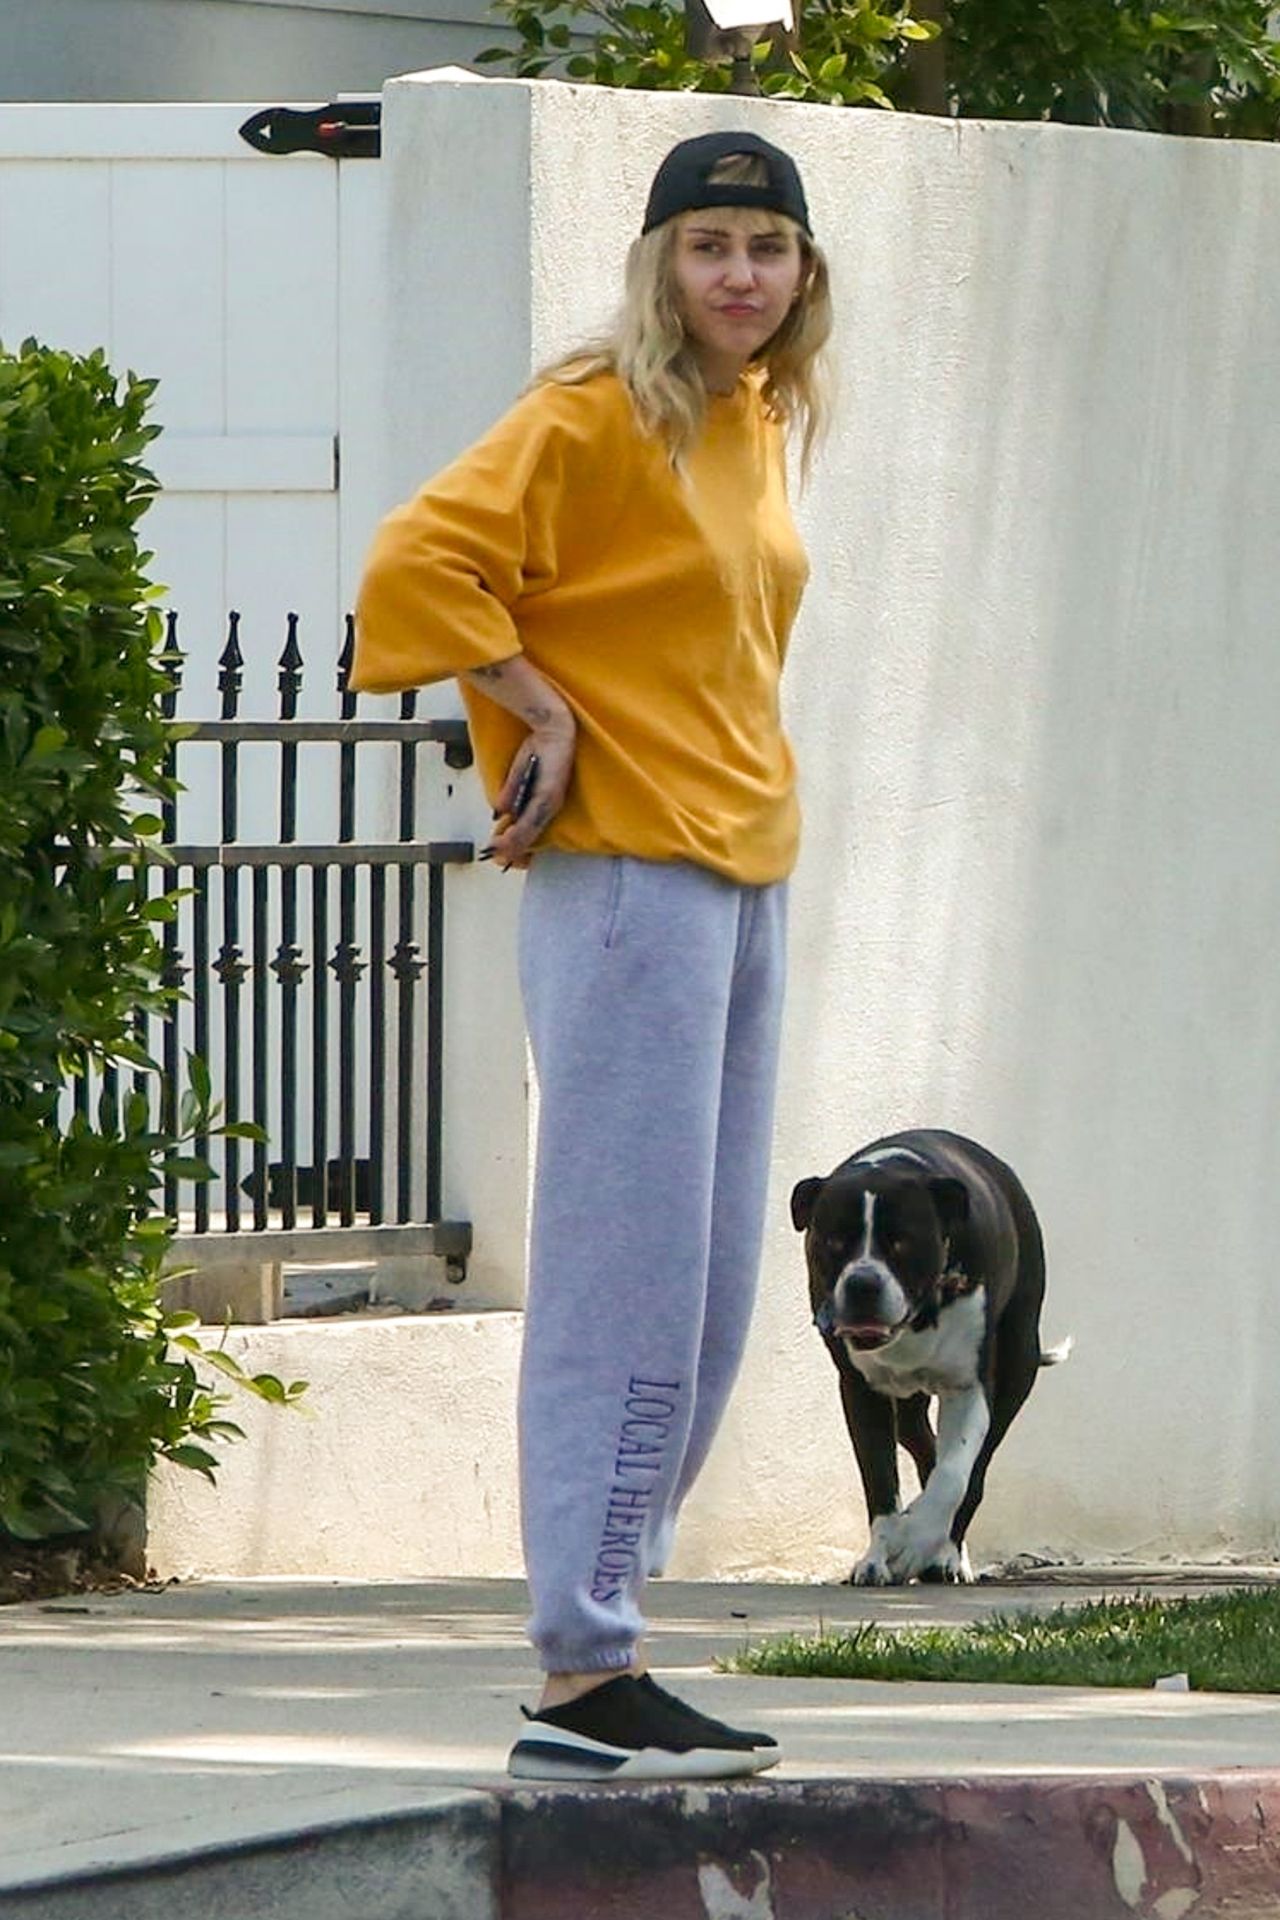 https://celebmafia.com/wp-content/uploads/2019/06/miley-cyrus-with-her-mom-out-in-los-angeles-06-05-2019-2.jpg